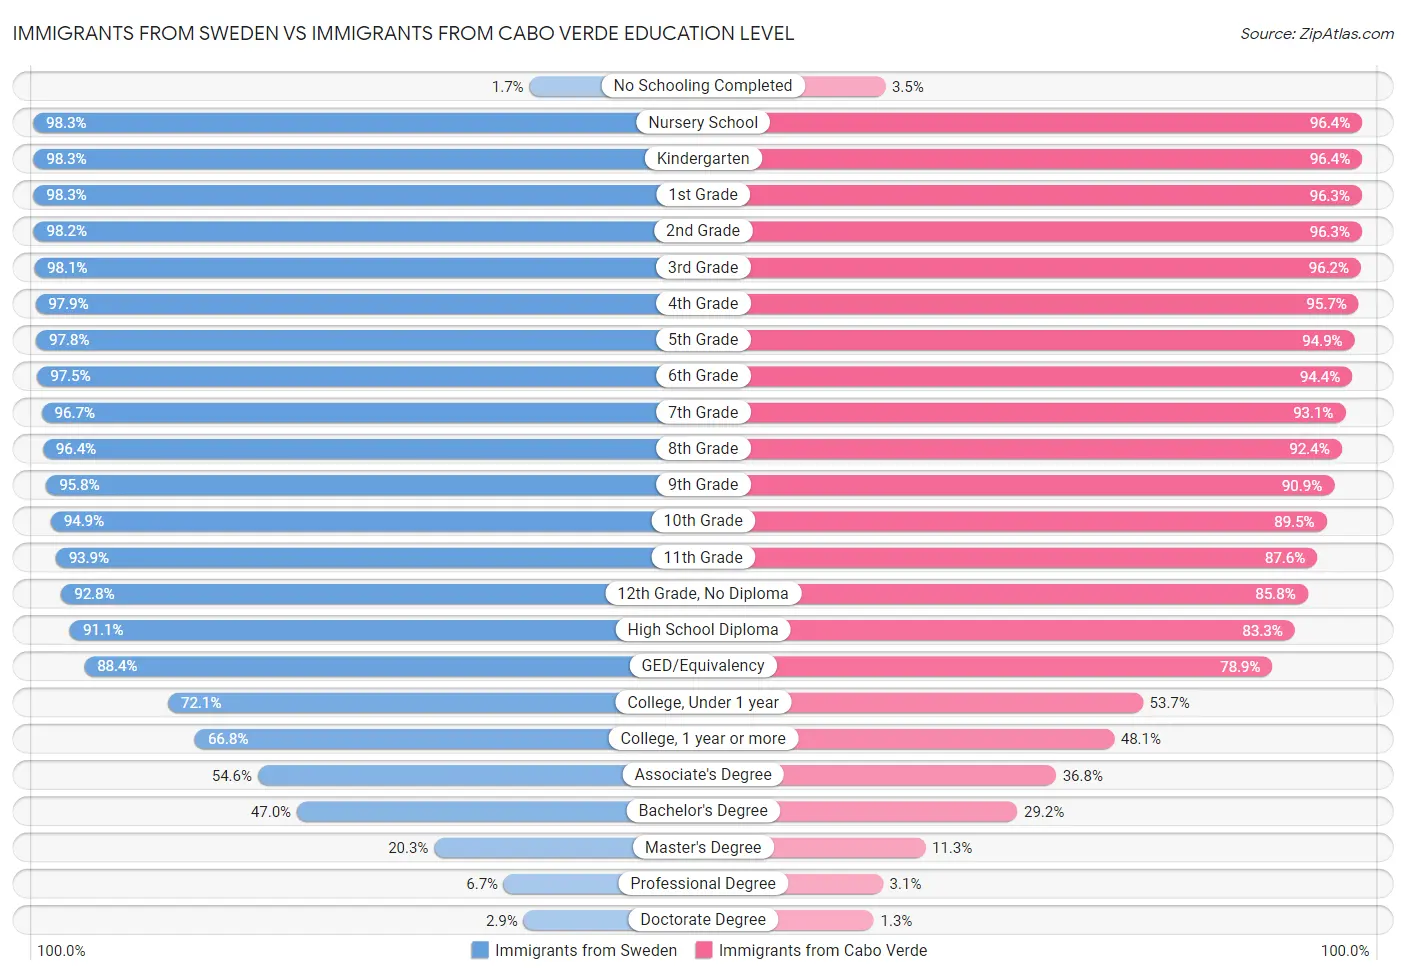 Immigrants from Sweden vs Immigrants from Cabo Verde Education Level